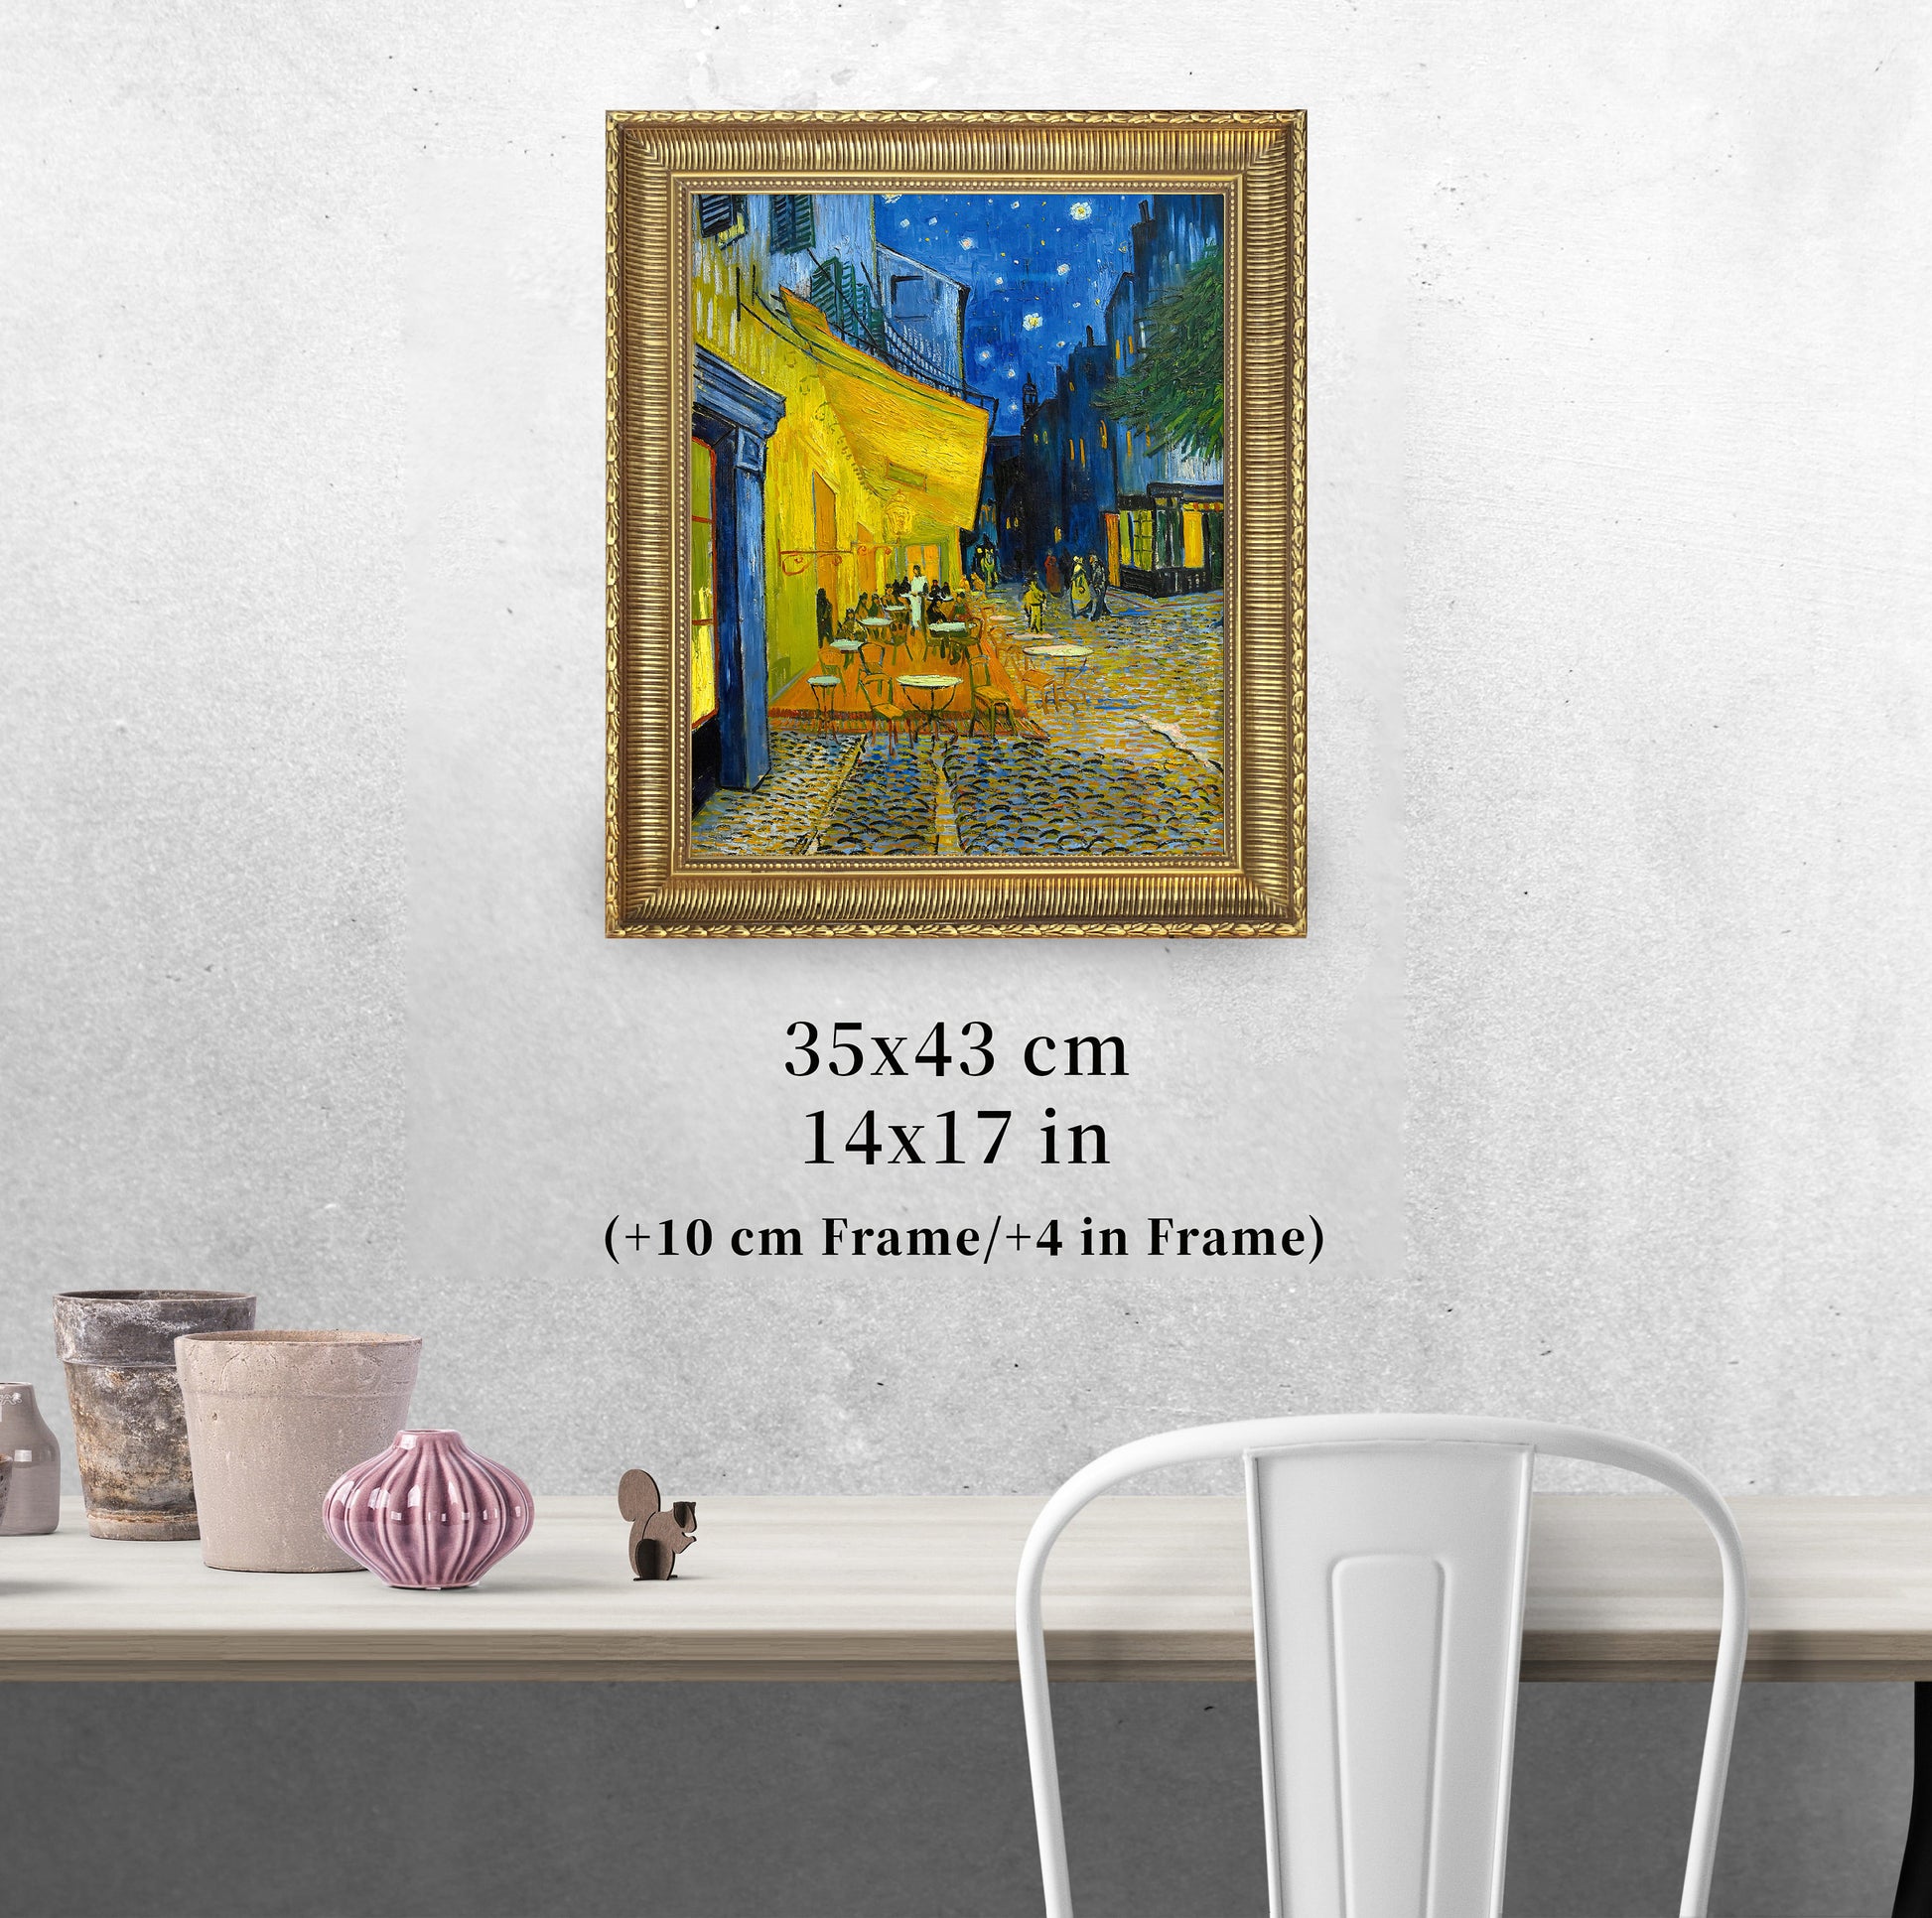 Terrace of a Café at Night by Vincent Van Gogh, 3d Printed with texture and brush strokes looks like original oil-painting, code:065